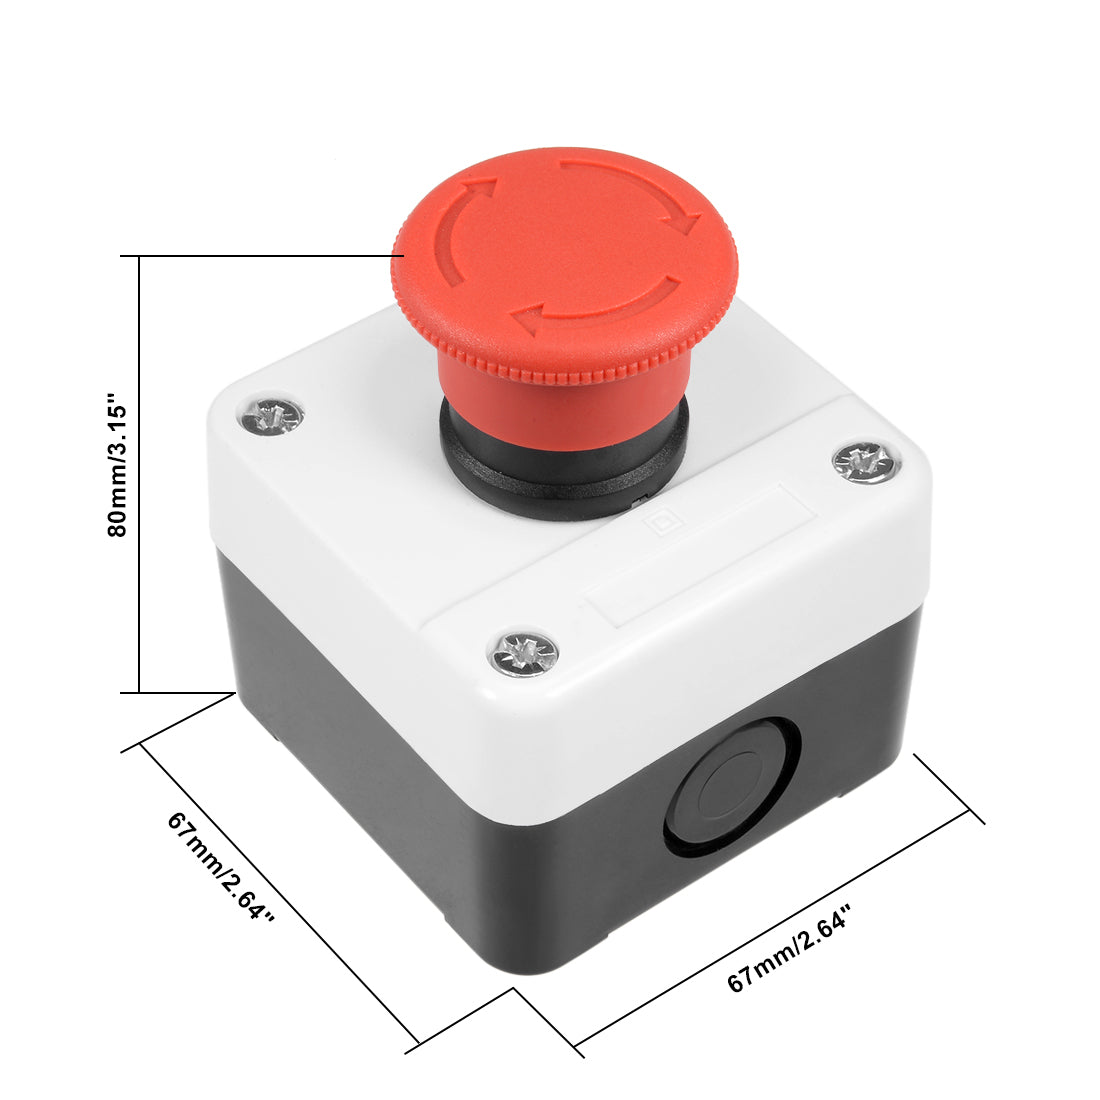 uxcell Uxcell Push Button Switch Station, Red Mushroom Self Lock Emergency Stop, 400V 10A/6A